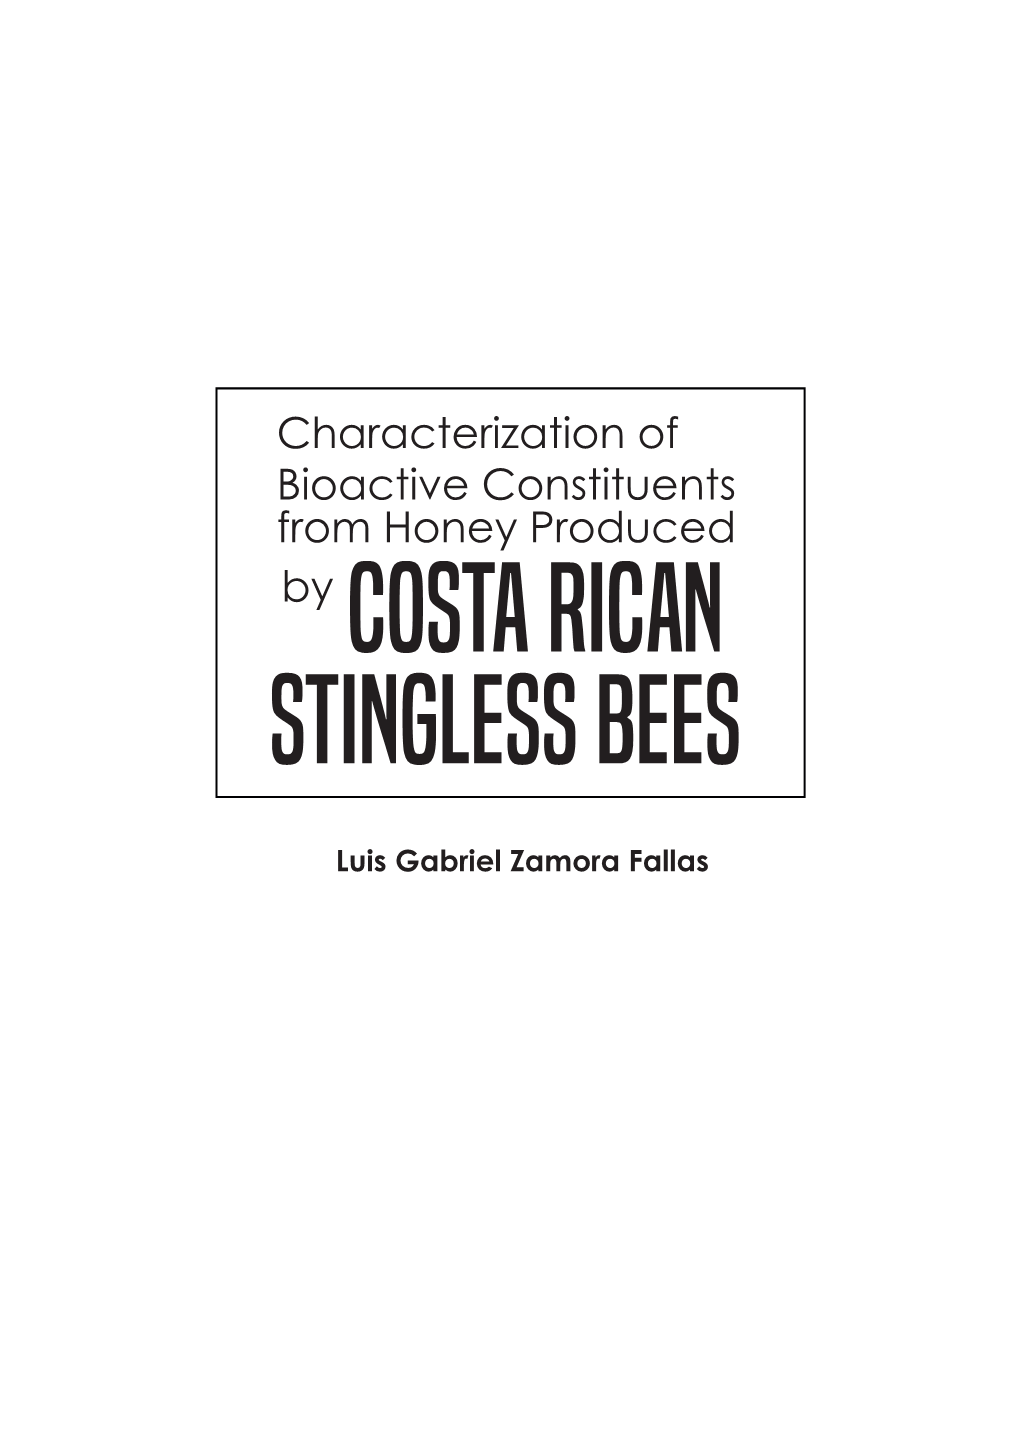 Costa Rican Stingless Bees